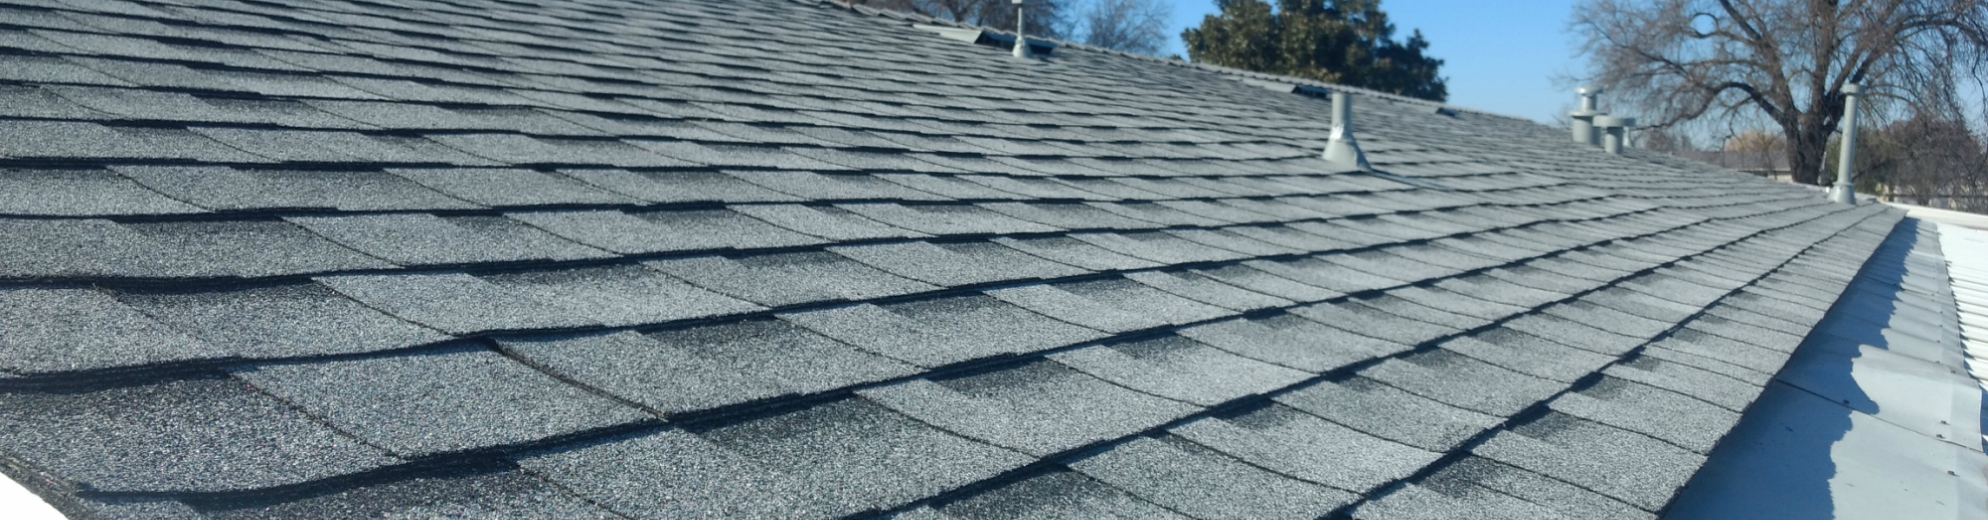 roofing replacement